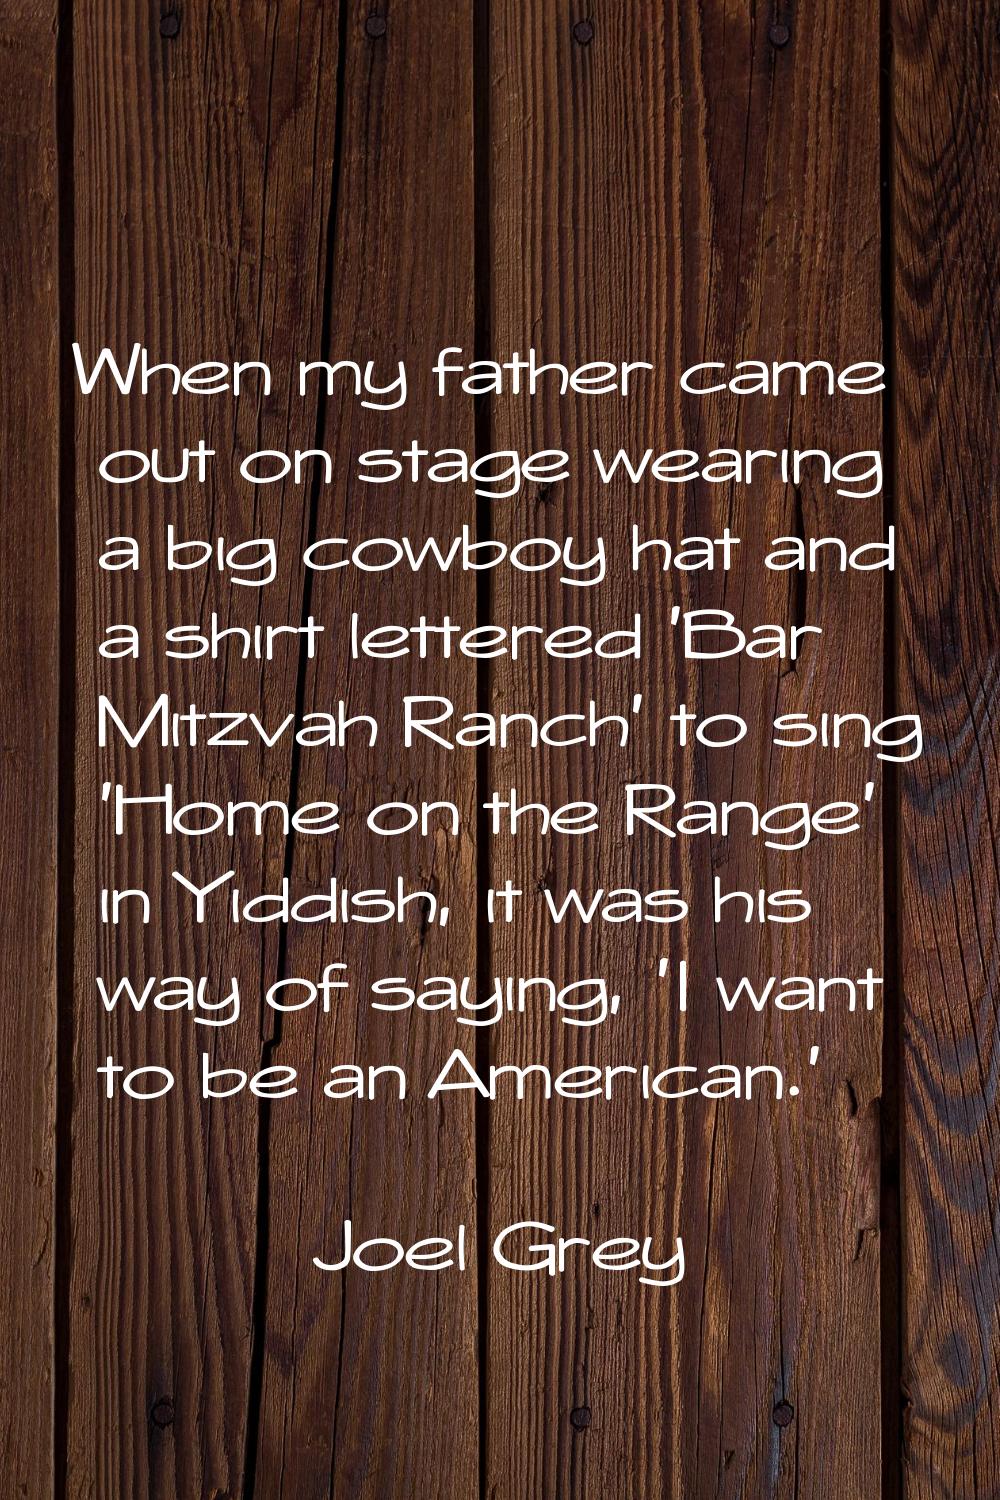 When my father came out on stage wearing a big cowboy hat and a shirt lettered 'Bar Mitzvah Ranch' 